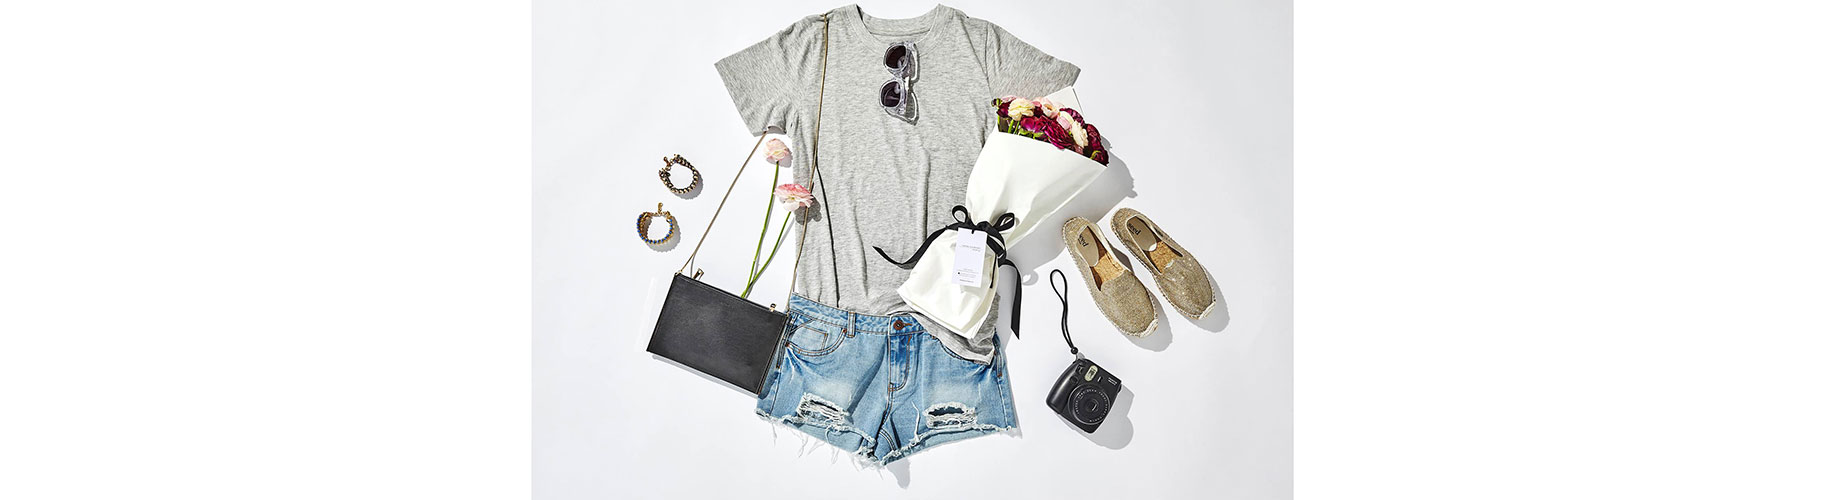 casual clothes and accessories flat lay photo